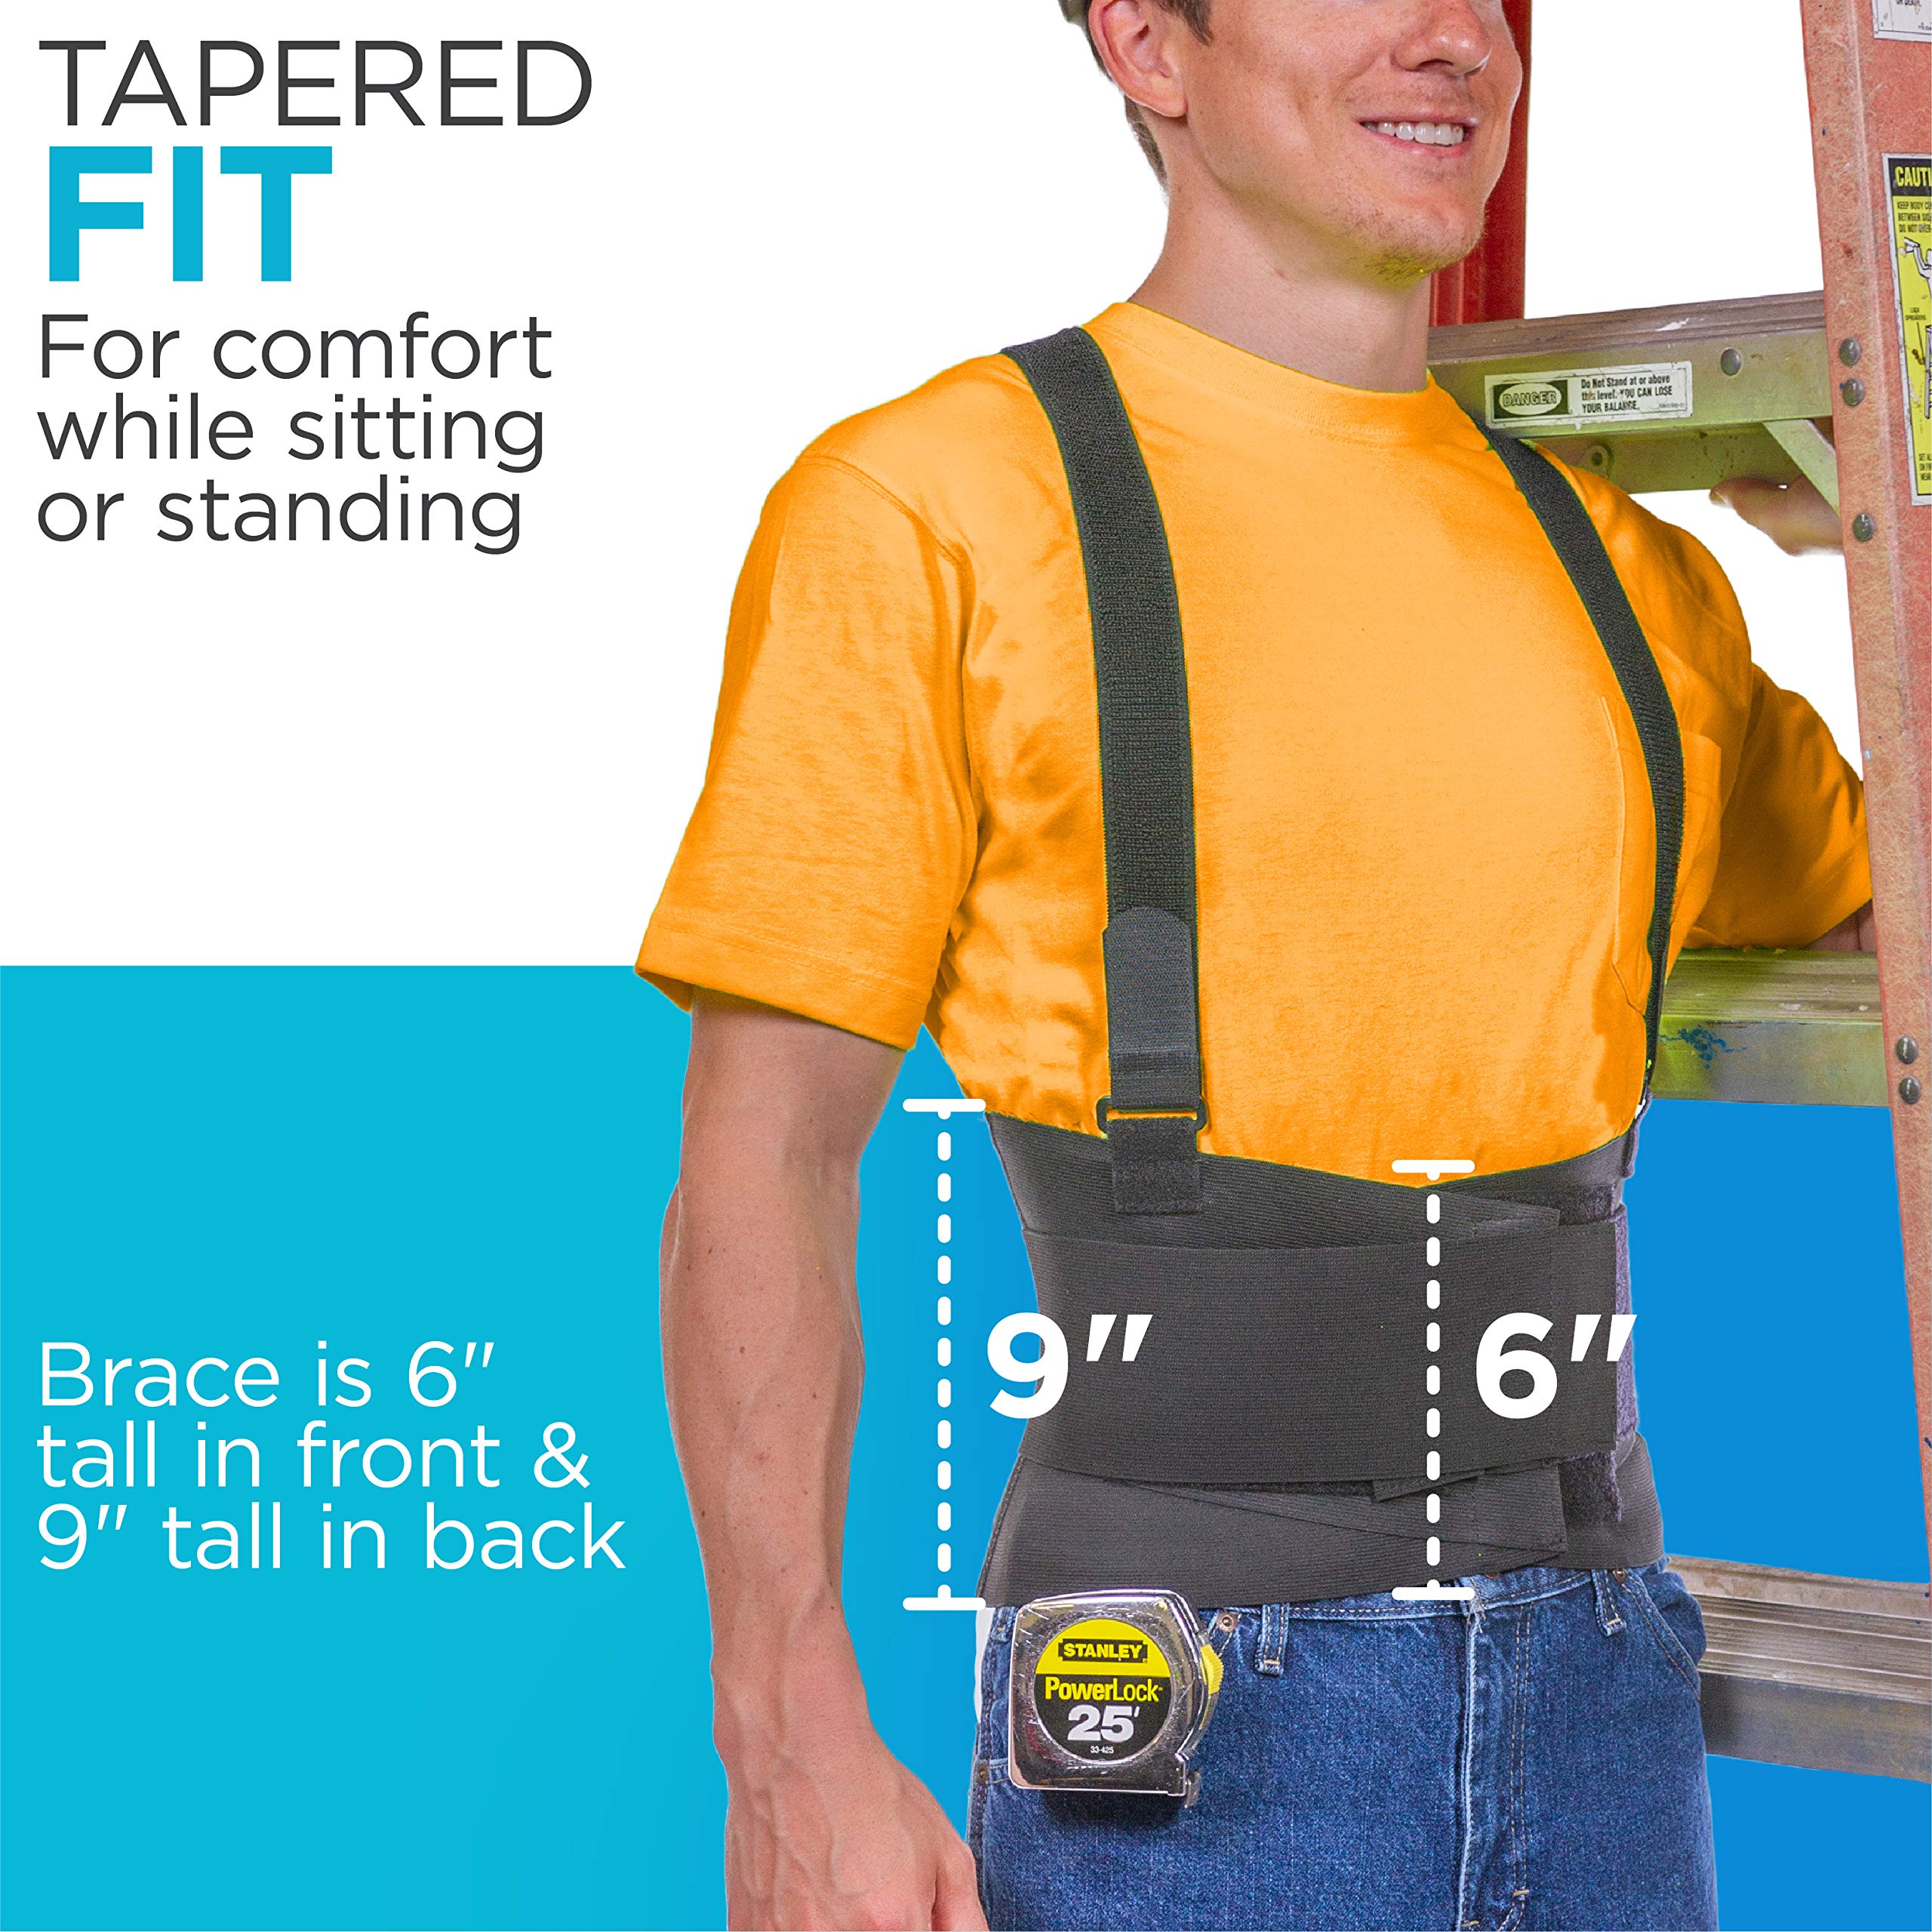 BraceAbility Industrial Work Back Brace | Removable Suspender Straps for Heavy Lifting Safety - Lower Back Pain Protection Belt for Men & Women in Construction, Moving and Warehouse Jobs (3XL)